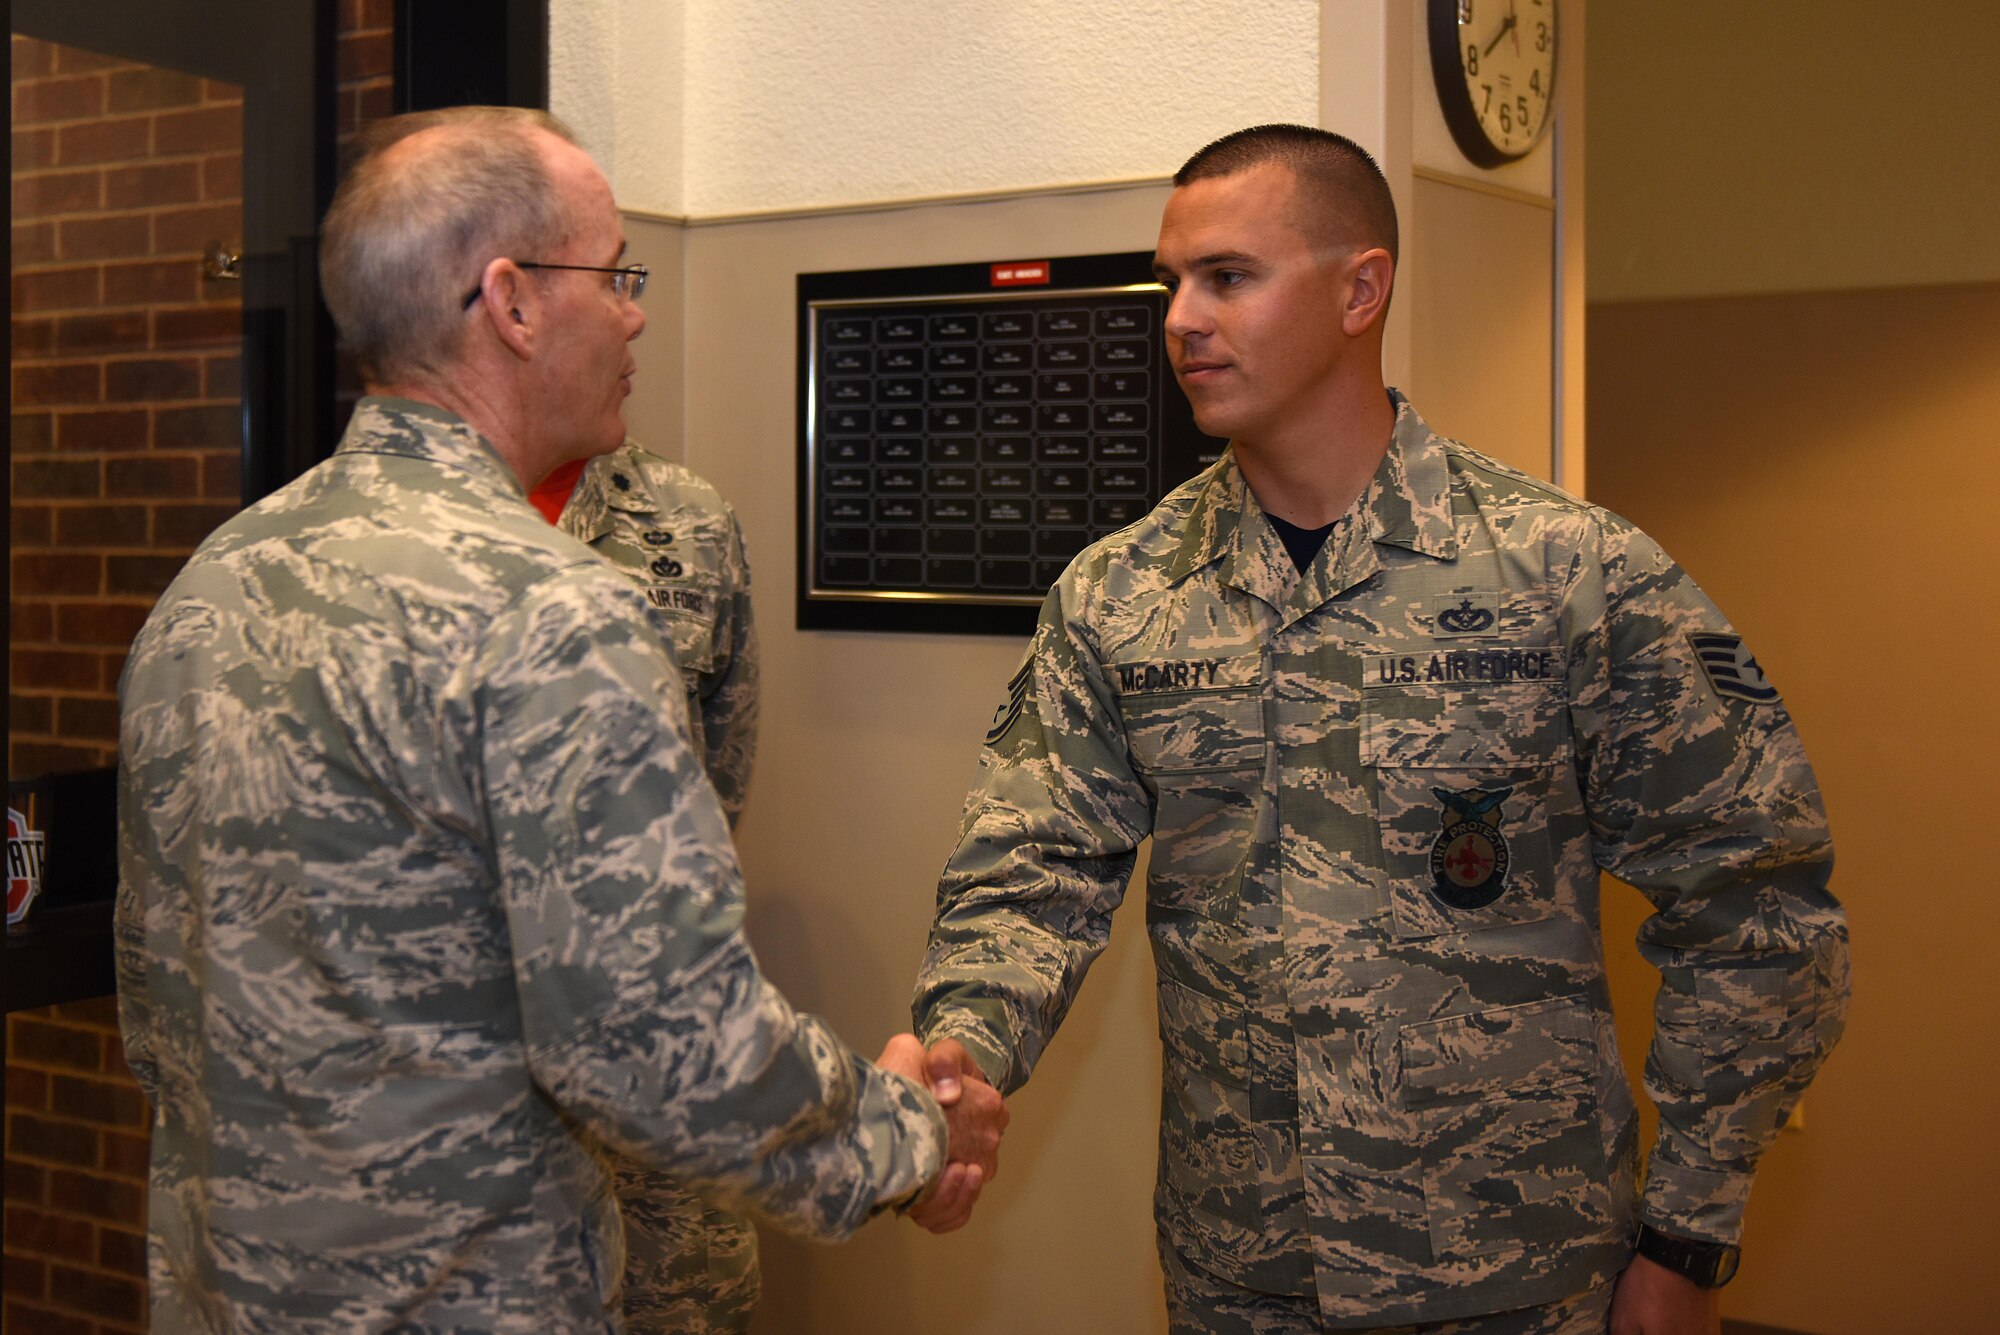 U.S. Air Force Maj. Gen. Bob LaBrutta, 2nd Air Force Commander, coins Staff Sgt. Adam McCarty, 312th Training Squadron rescue instructor, at the student dorms on Goodfellow Air Force Base, Texas, Oct. 7, 2016. McCarty was recognized for assisting emergency responders during an off-base emergency. (U.S. Air Force photo by Airman 1st Class Caelynn Ferguson/Released)